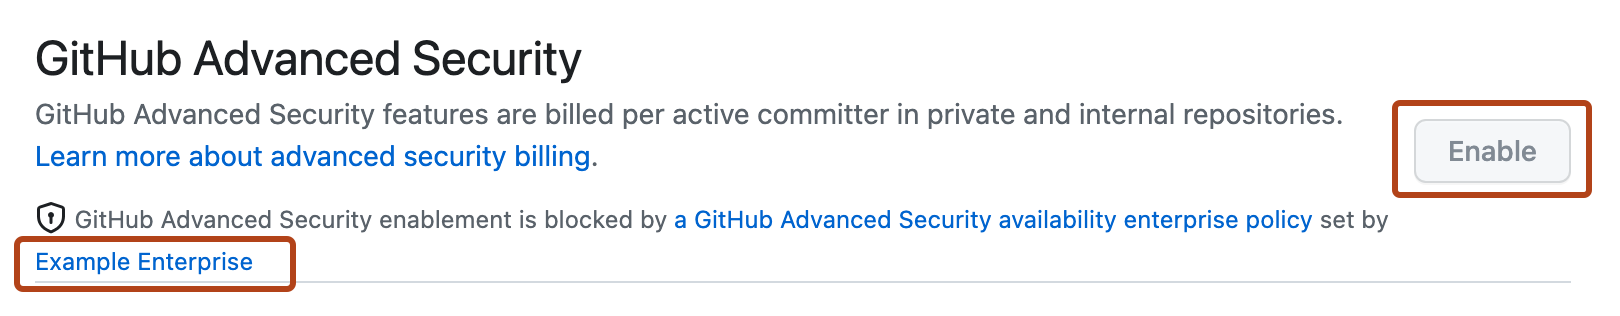 Screenshot of the "GitHub Advanced Security" setting. The owner of the enterprise policy and the inactive "Enable" button are highlighted with a dark orange outline.